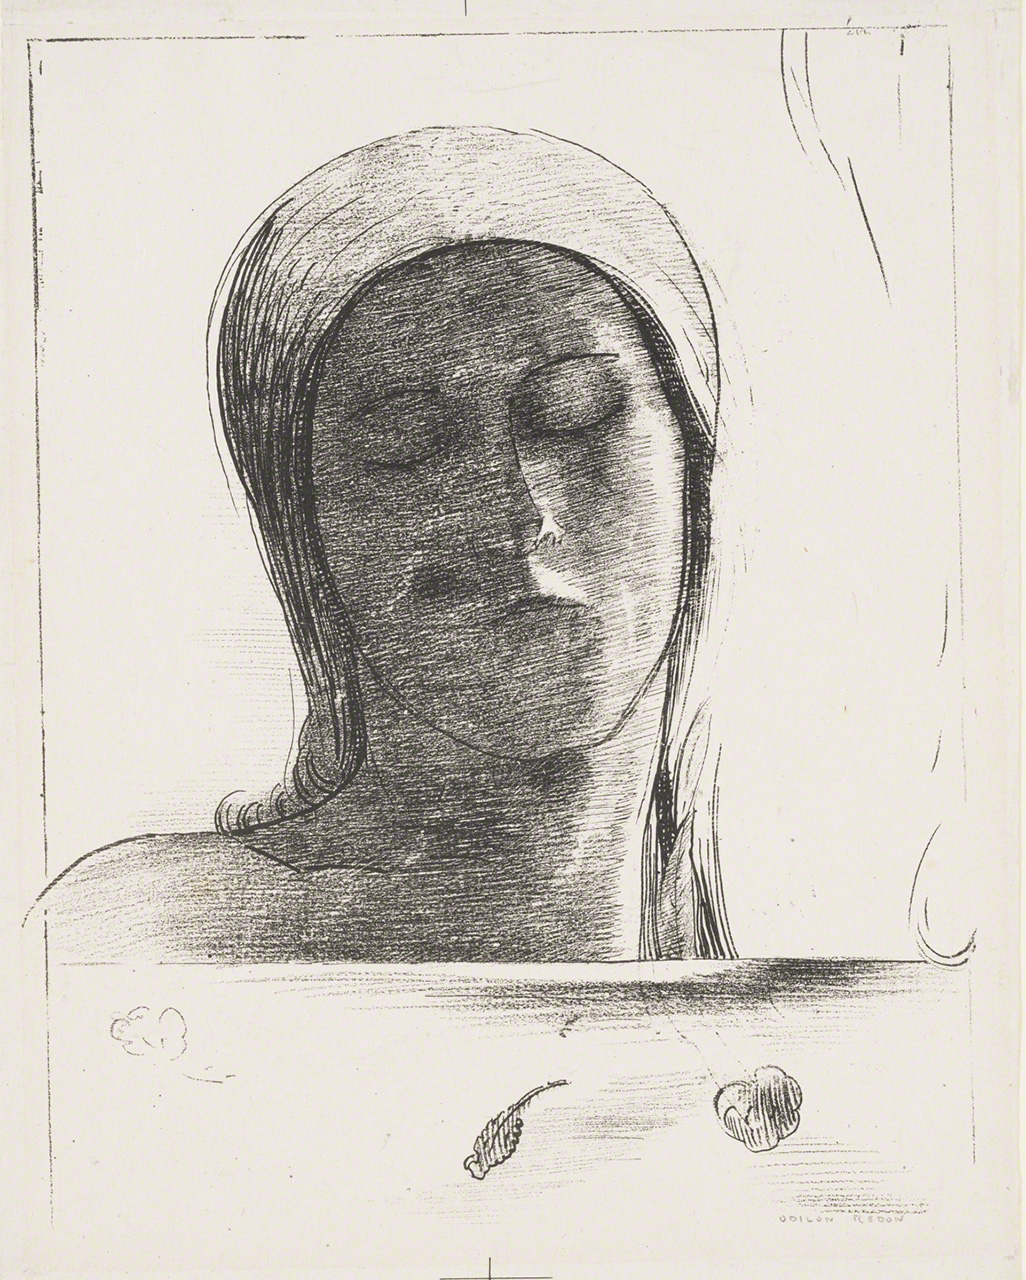 Odilon Redon, Yeux clos (Eyes Closed), 1890, lithograph on paper, The Museum of Fine Arts, Gifu. Displayed in the exhibition 1894 Visions Odilon Redon and Henri de Toulouse-Lautrec at Mitsubishi Ichigokan Museum, Tokyo. Courtesy Mitsubishi Ichigokan Museum.